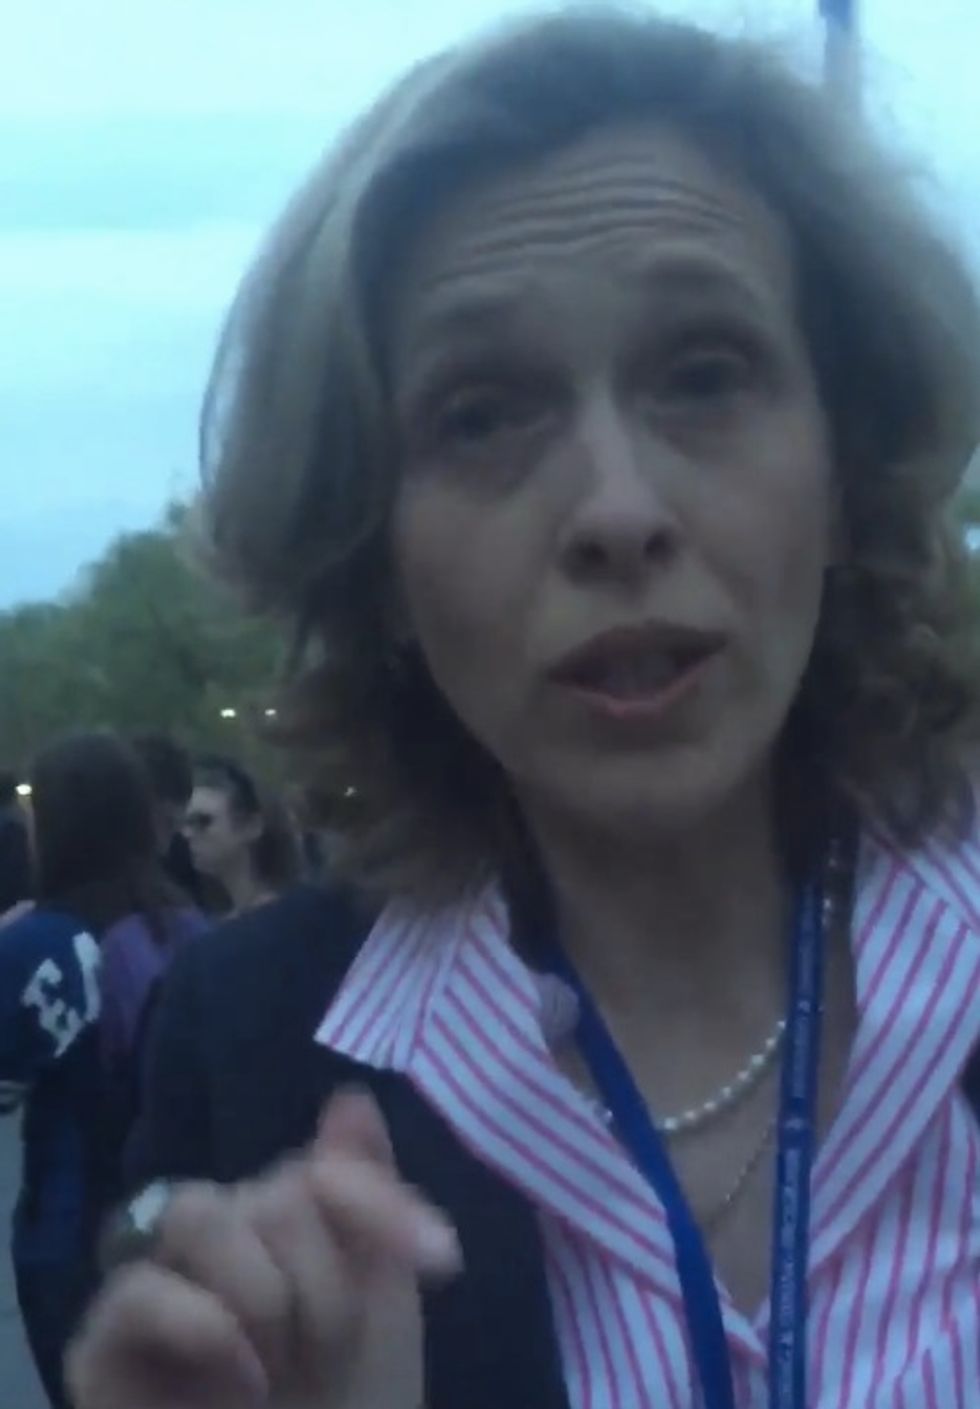 ‘We’re Providing...a Safe Space’: College Official Tells Journalist She’s Calling Cops on Film Crew During Student Protest Against Conservative Speaker